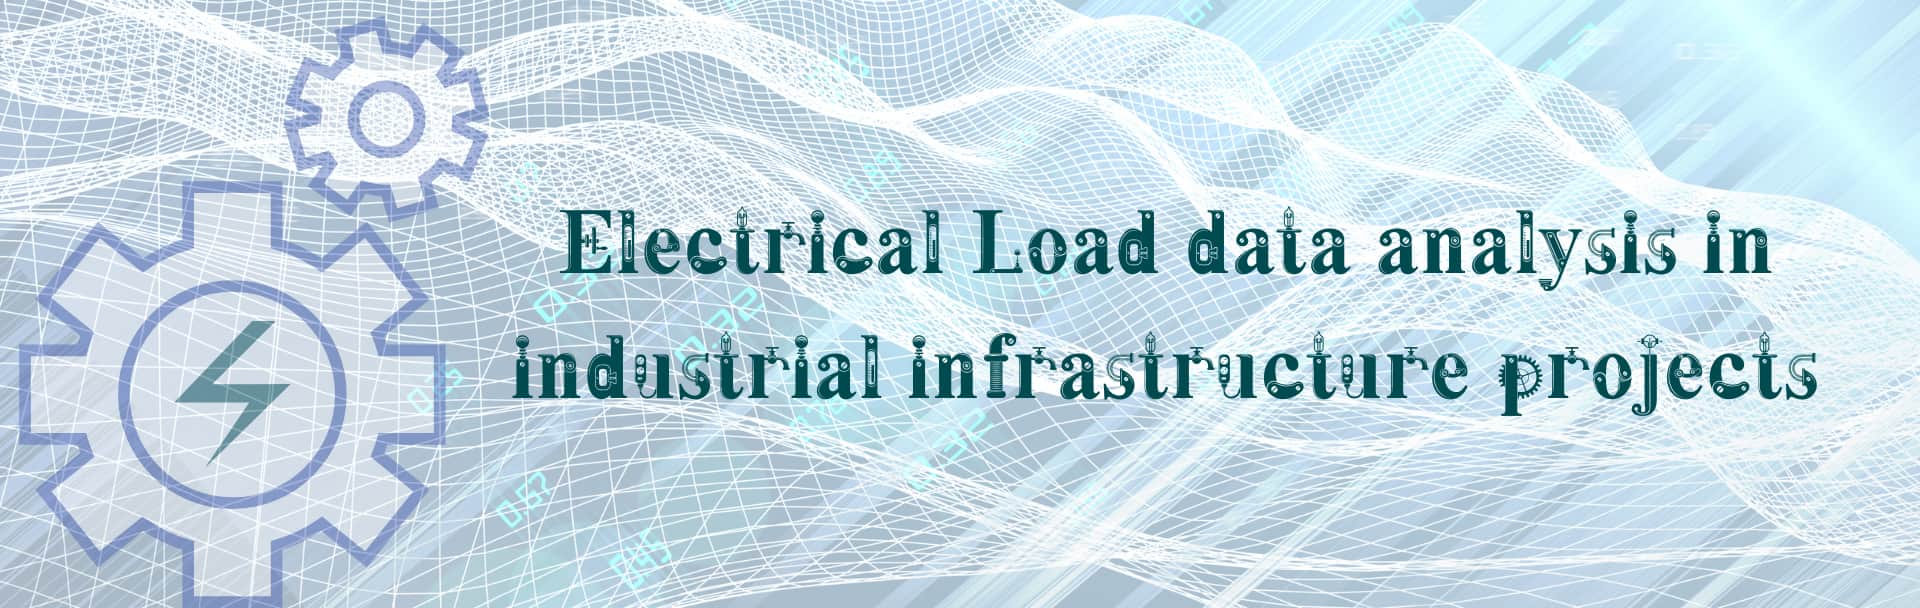 Electrical load analysis